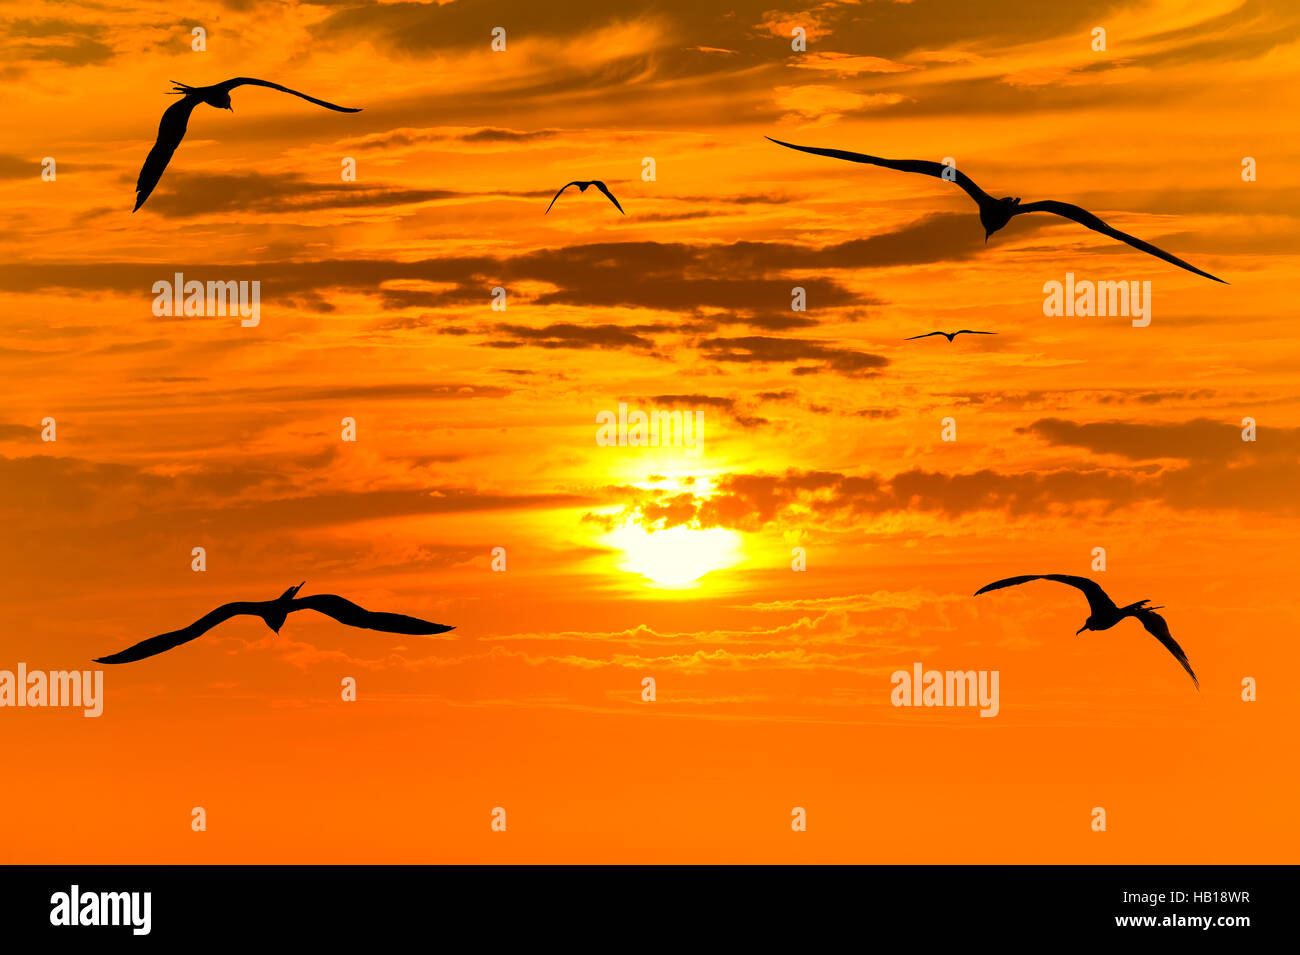 Birds sunset flying silhouettes is flock of birds flying into the colorful surreal sunset with a white hot glowing sun guiding the way. Stock Photo